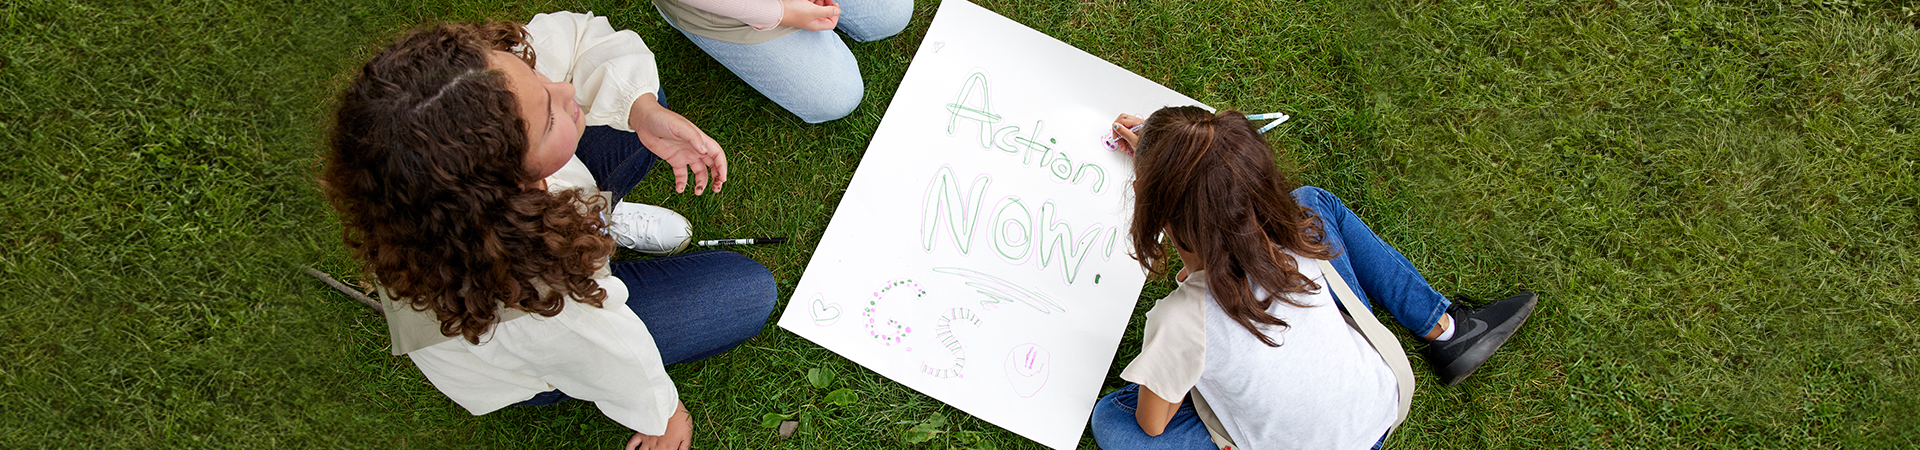  Overhead shot of three girls decorating a poster which reads "Action Now" 